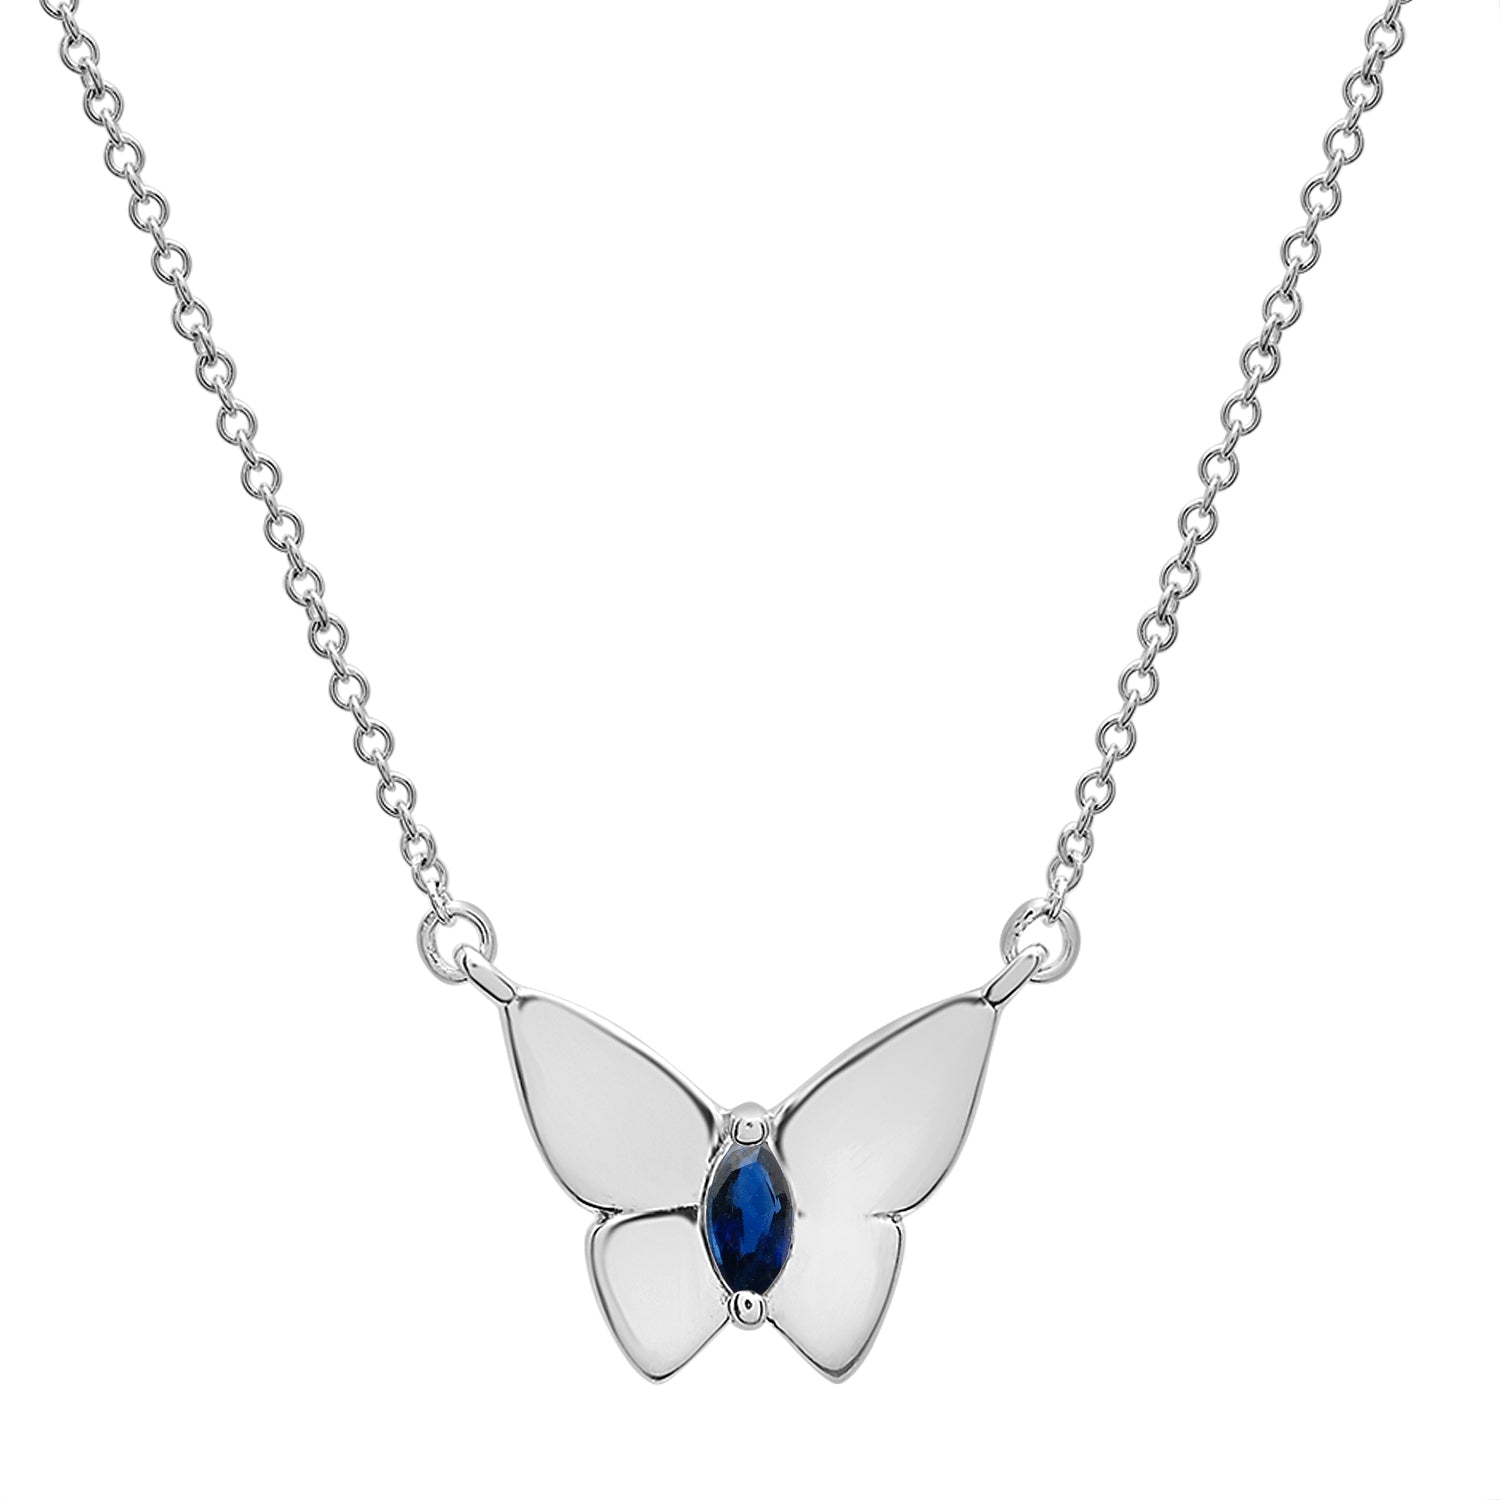 Blue Stone Butterfly Birthstone Necklace with Silver chain